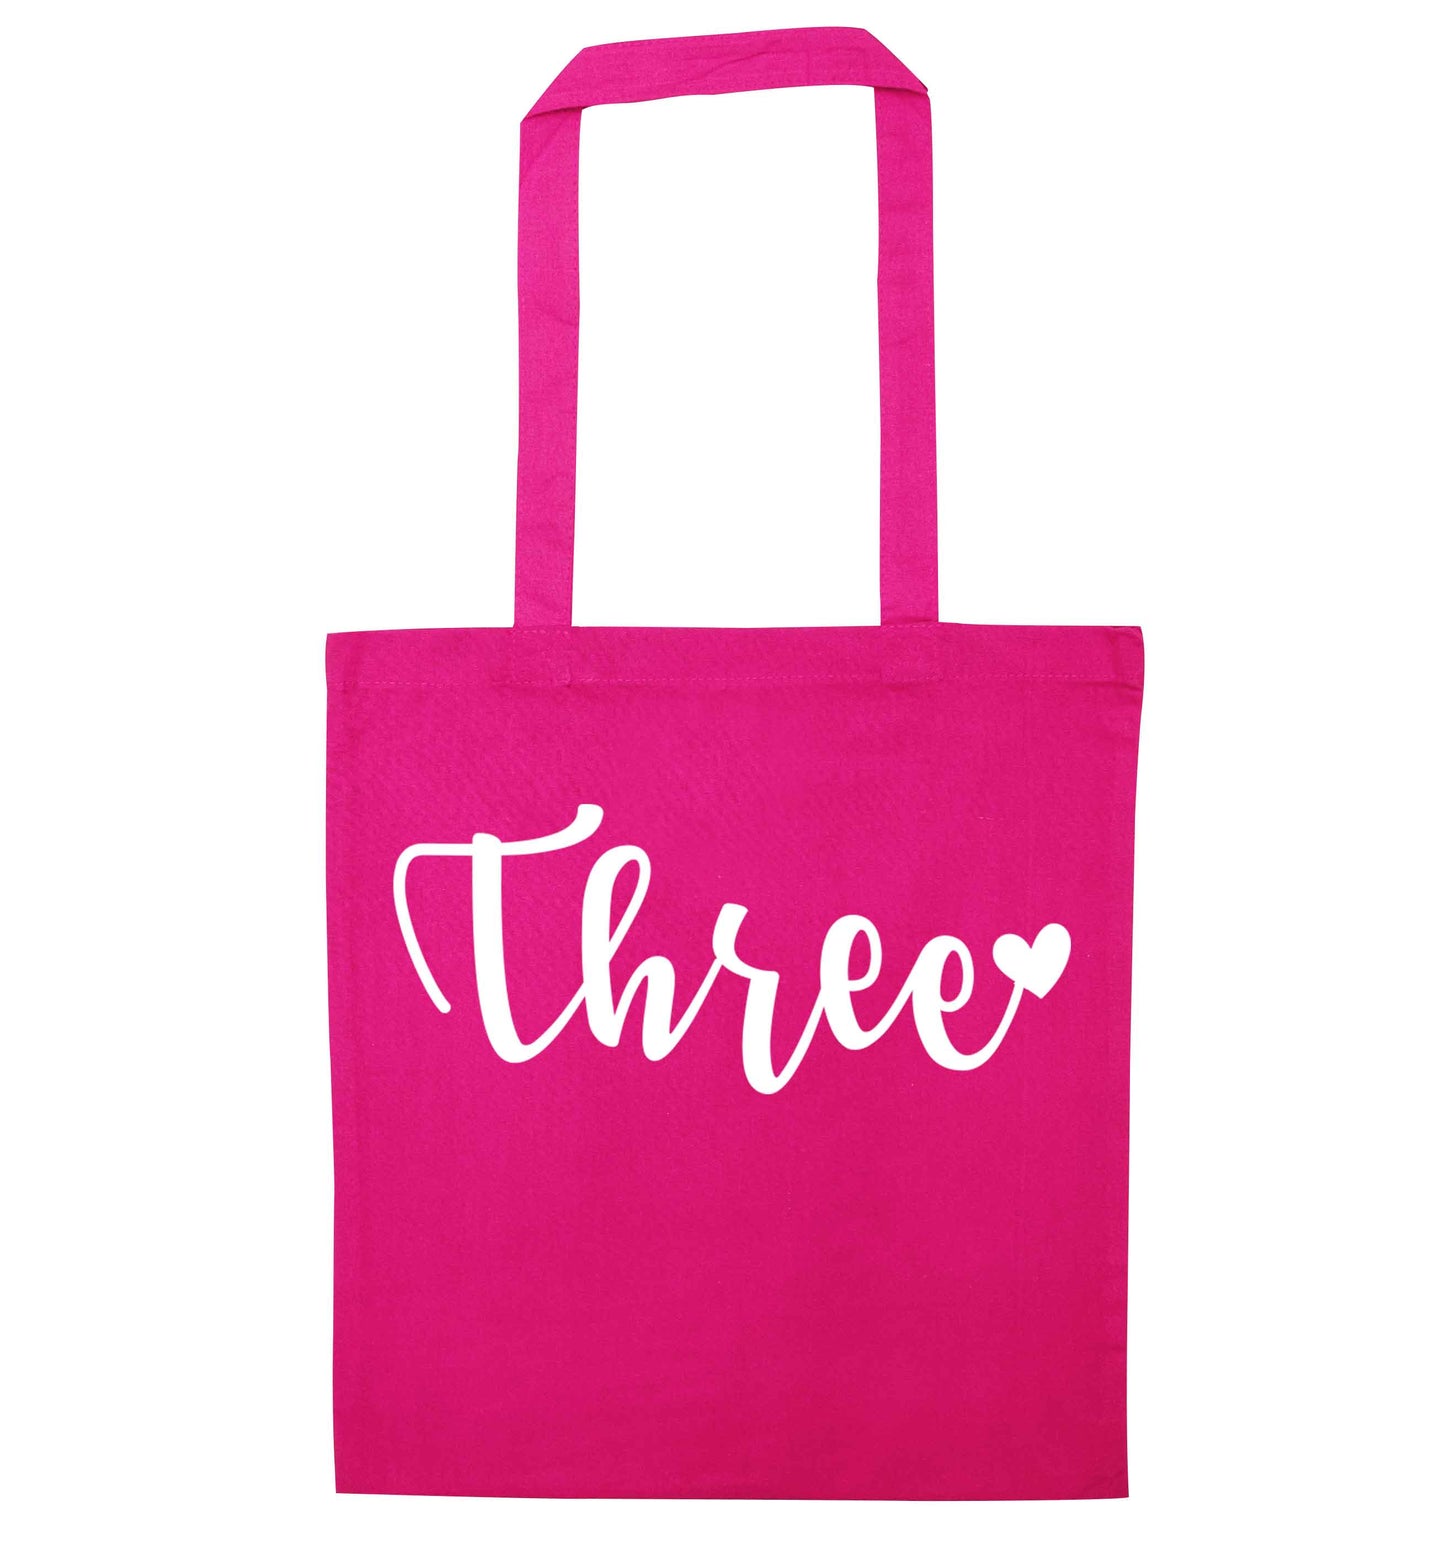 Two and Heart pink tote bag